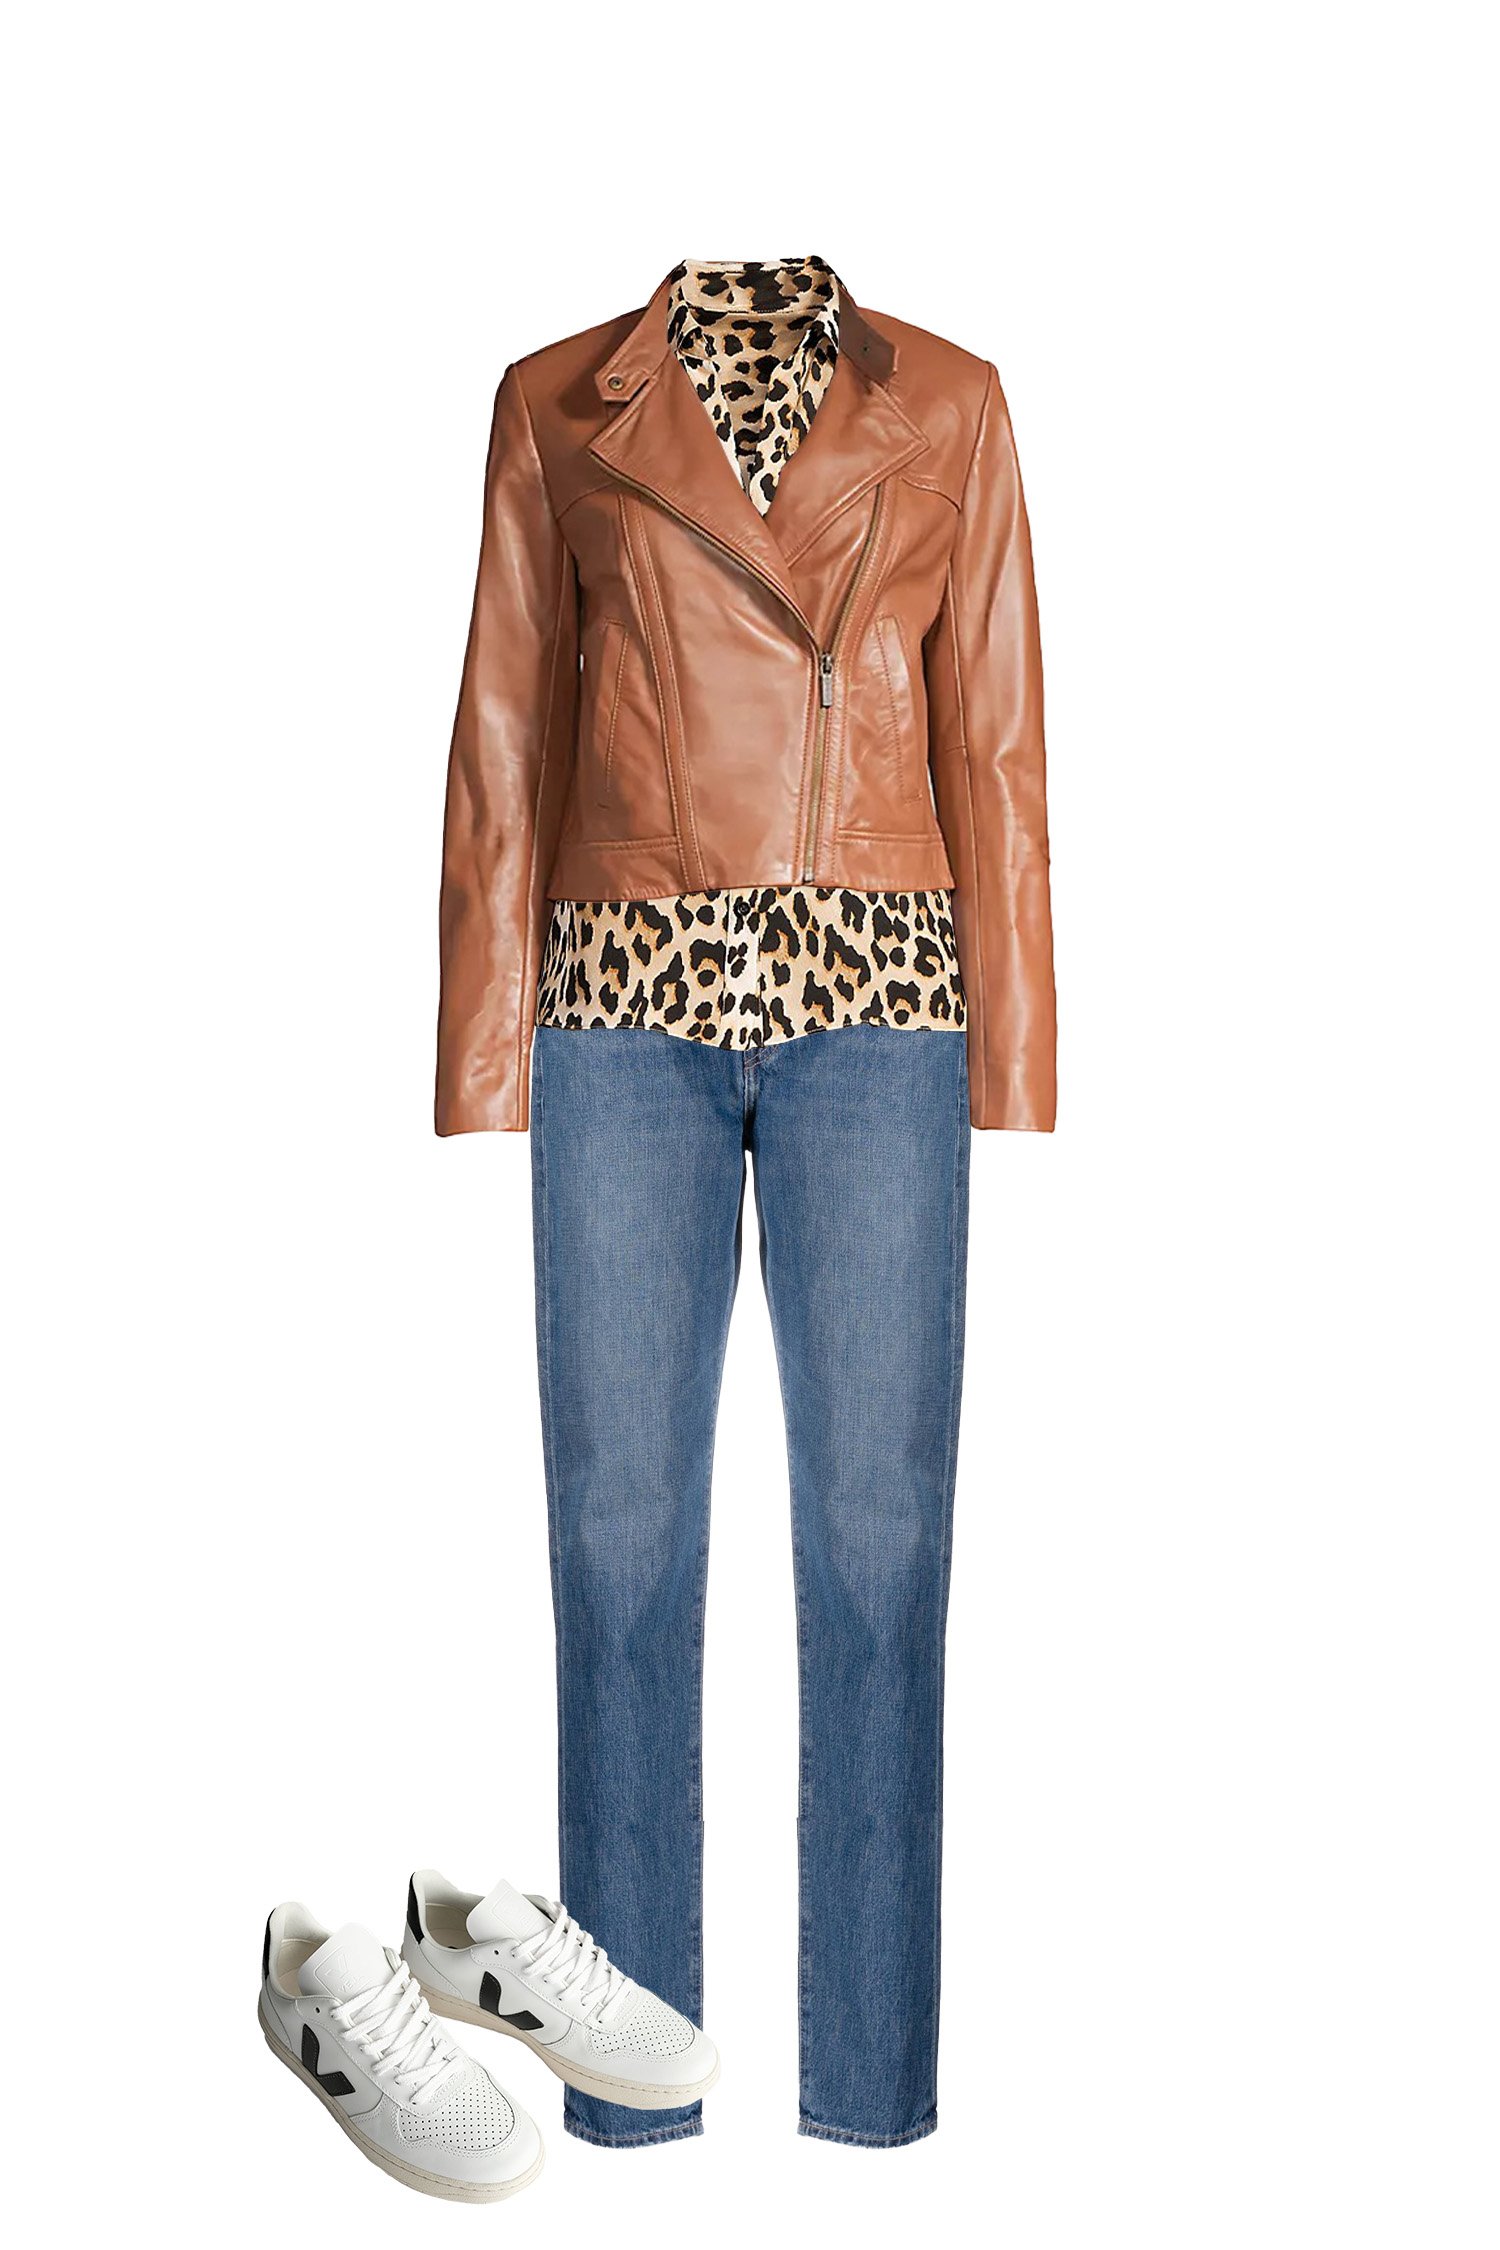 Mom Jeans - Leopard Shirt - Camel Leather Jacket - White Sneakers